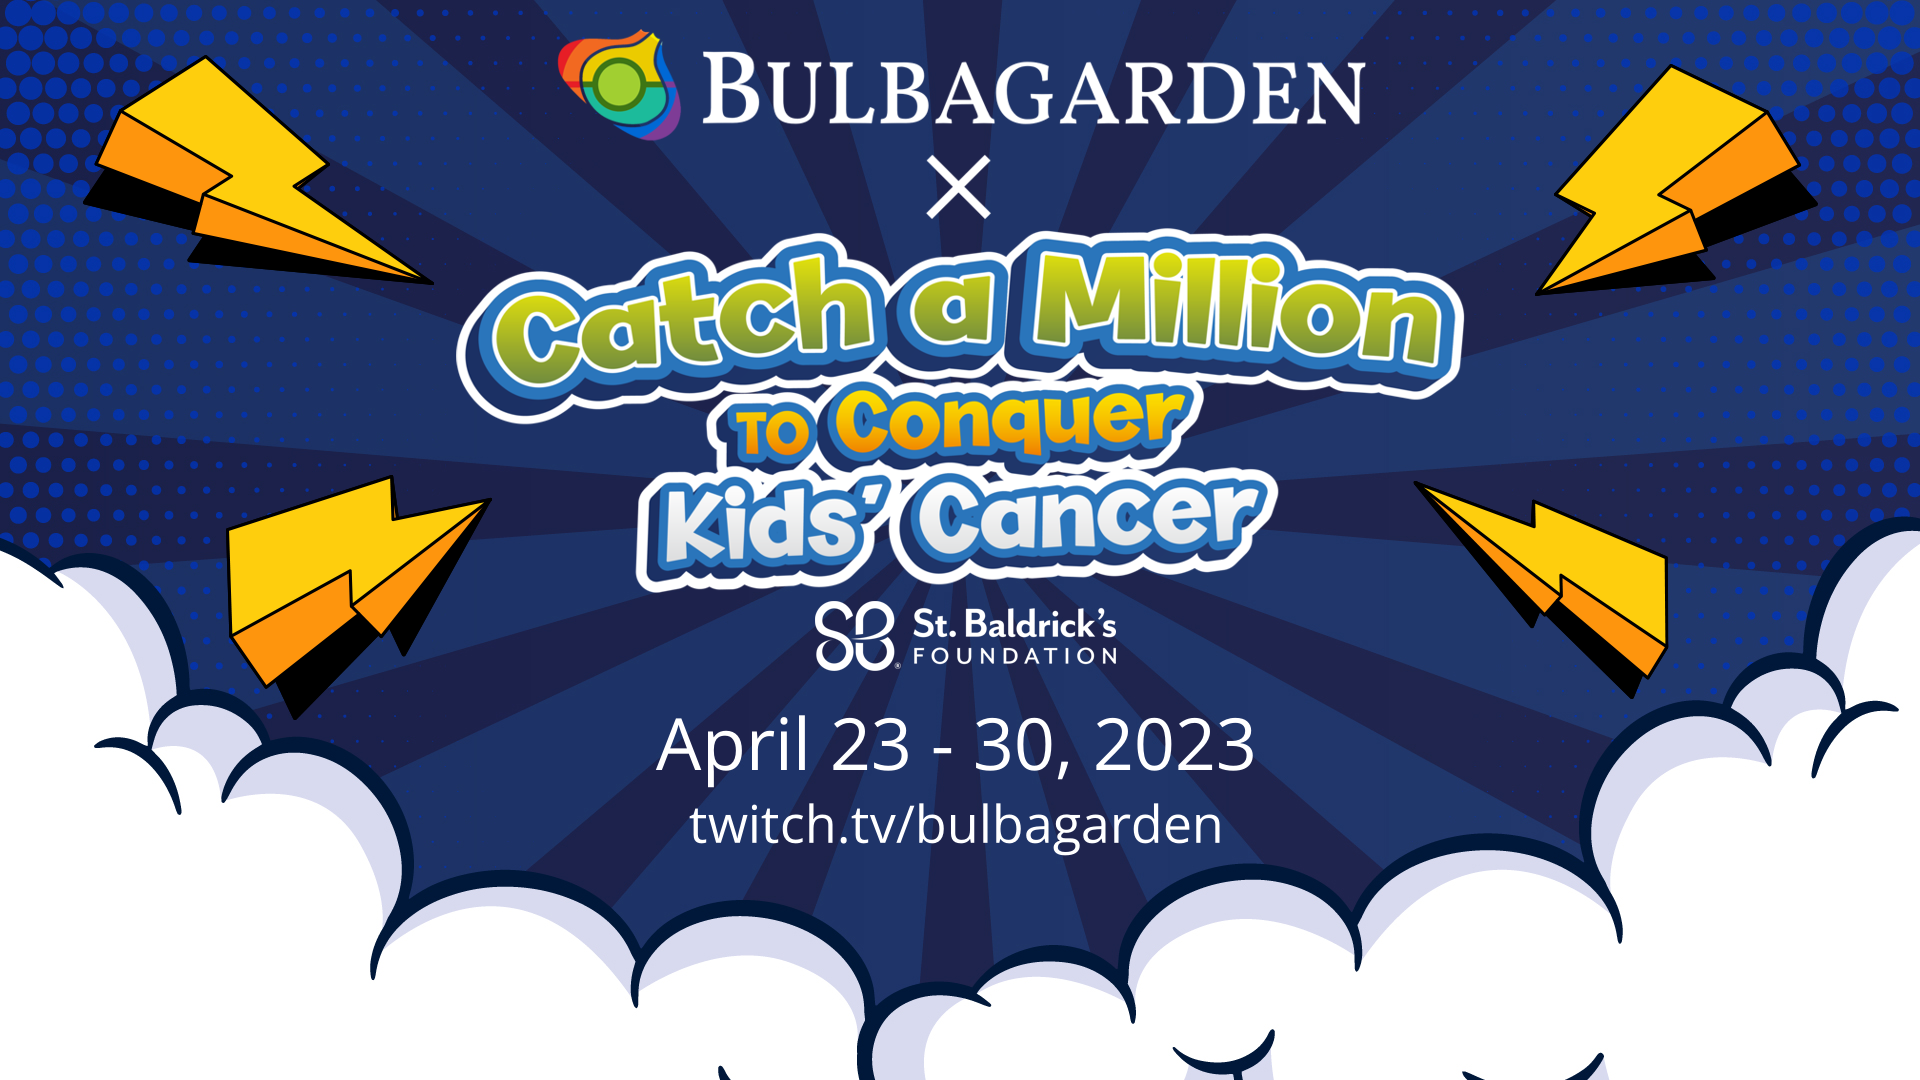 Bulbagarden x Catch a Million to Conquer Kids' Cancer